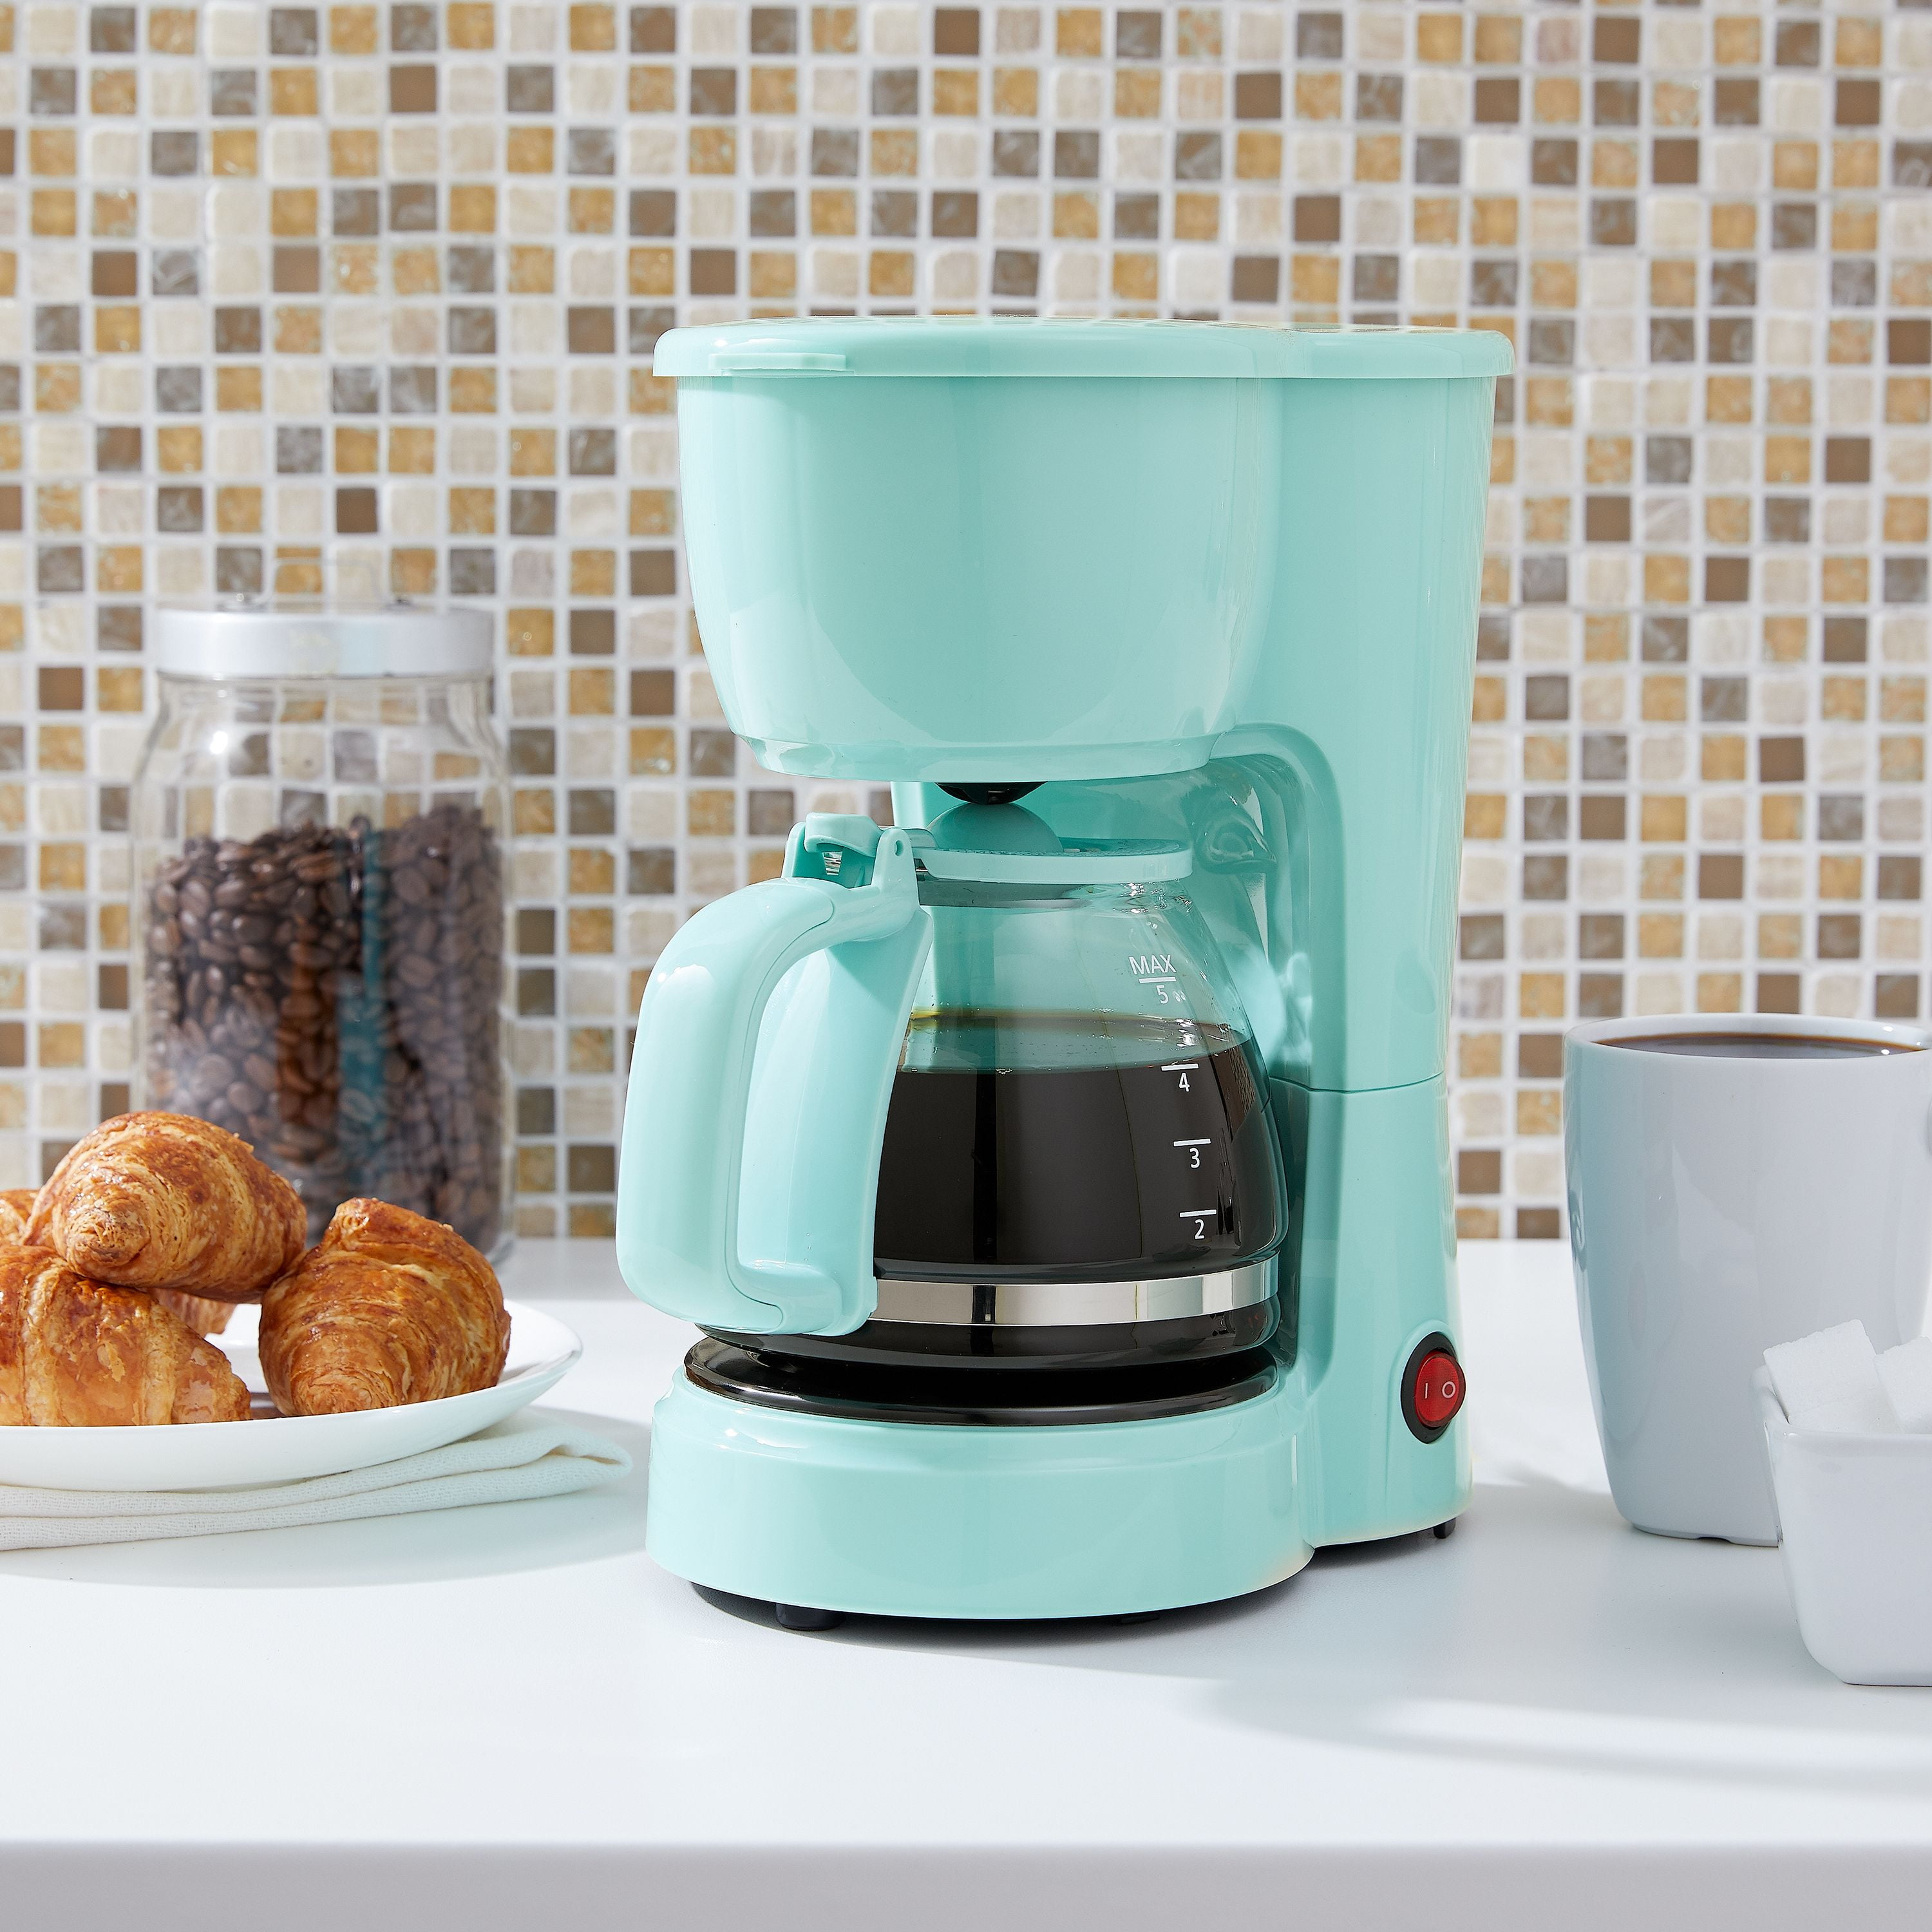 Review - Cheap Coffee Maker - Walmart Mainstays 5 Cup 